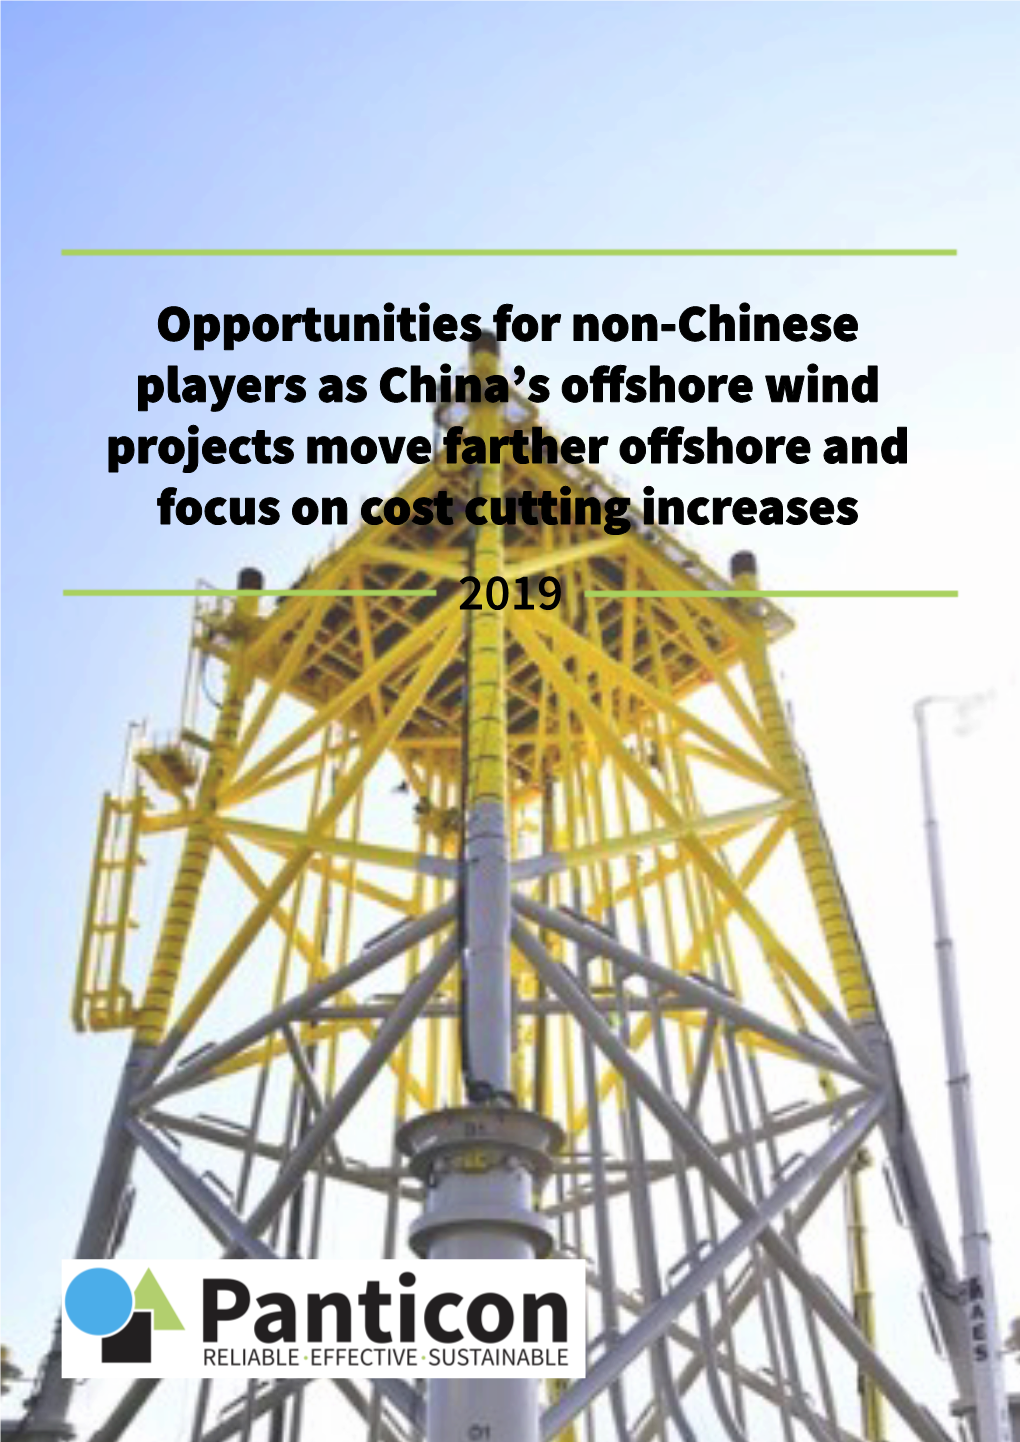 Opportunities for Non-Chinese Players As China's Offshore Wind Projects Move Farther